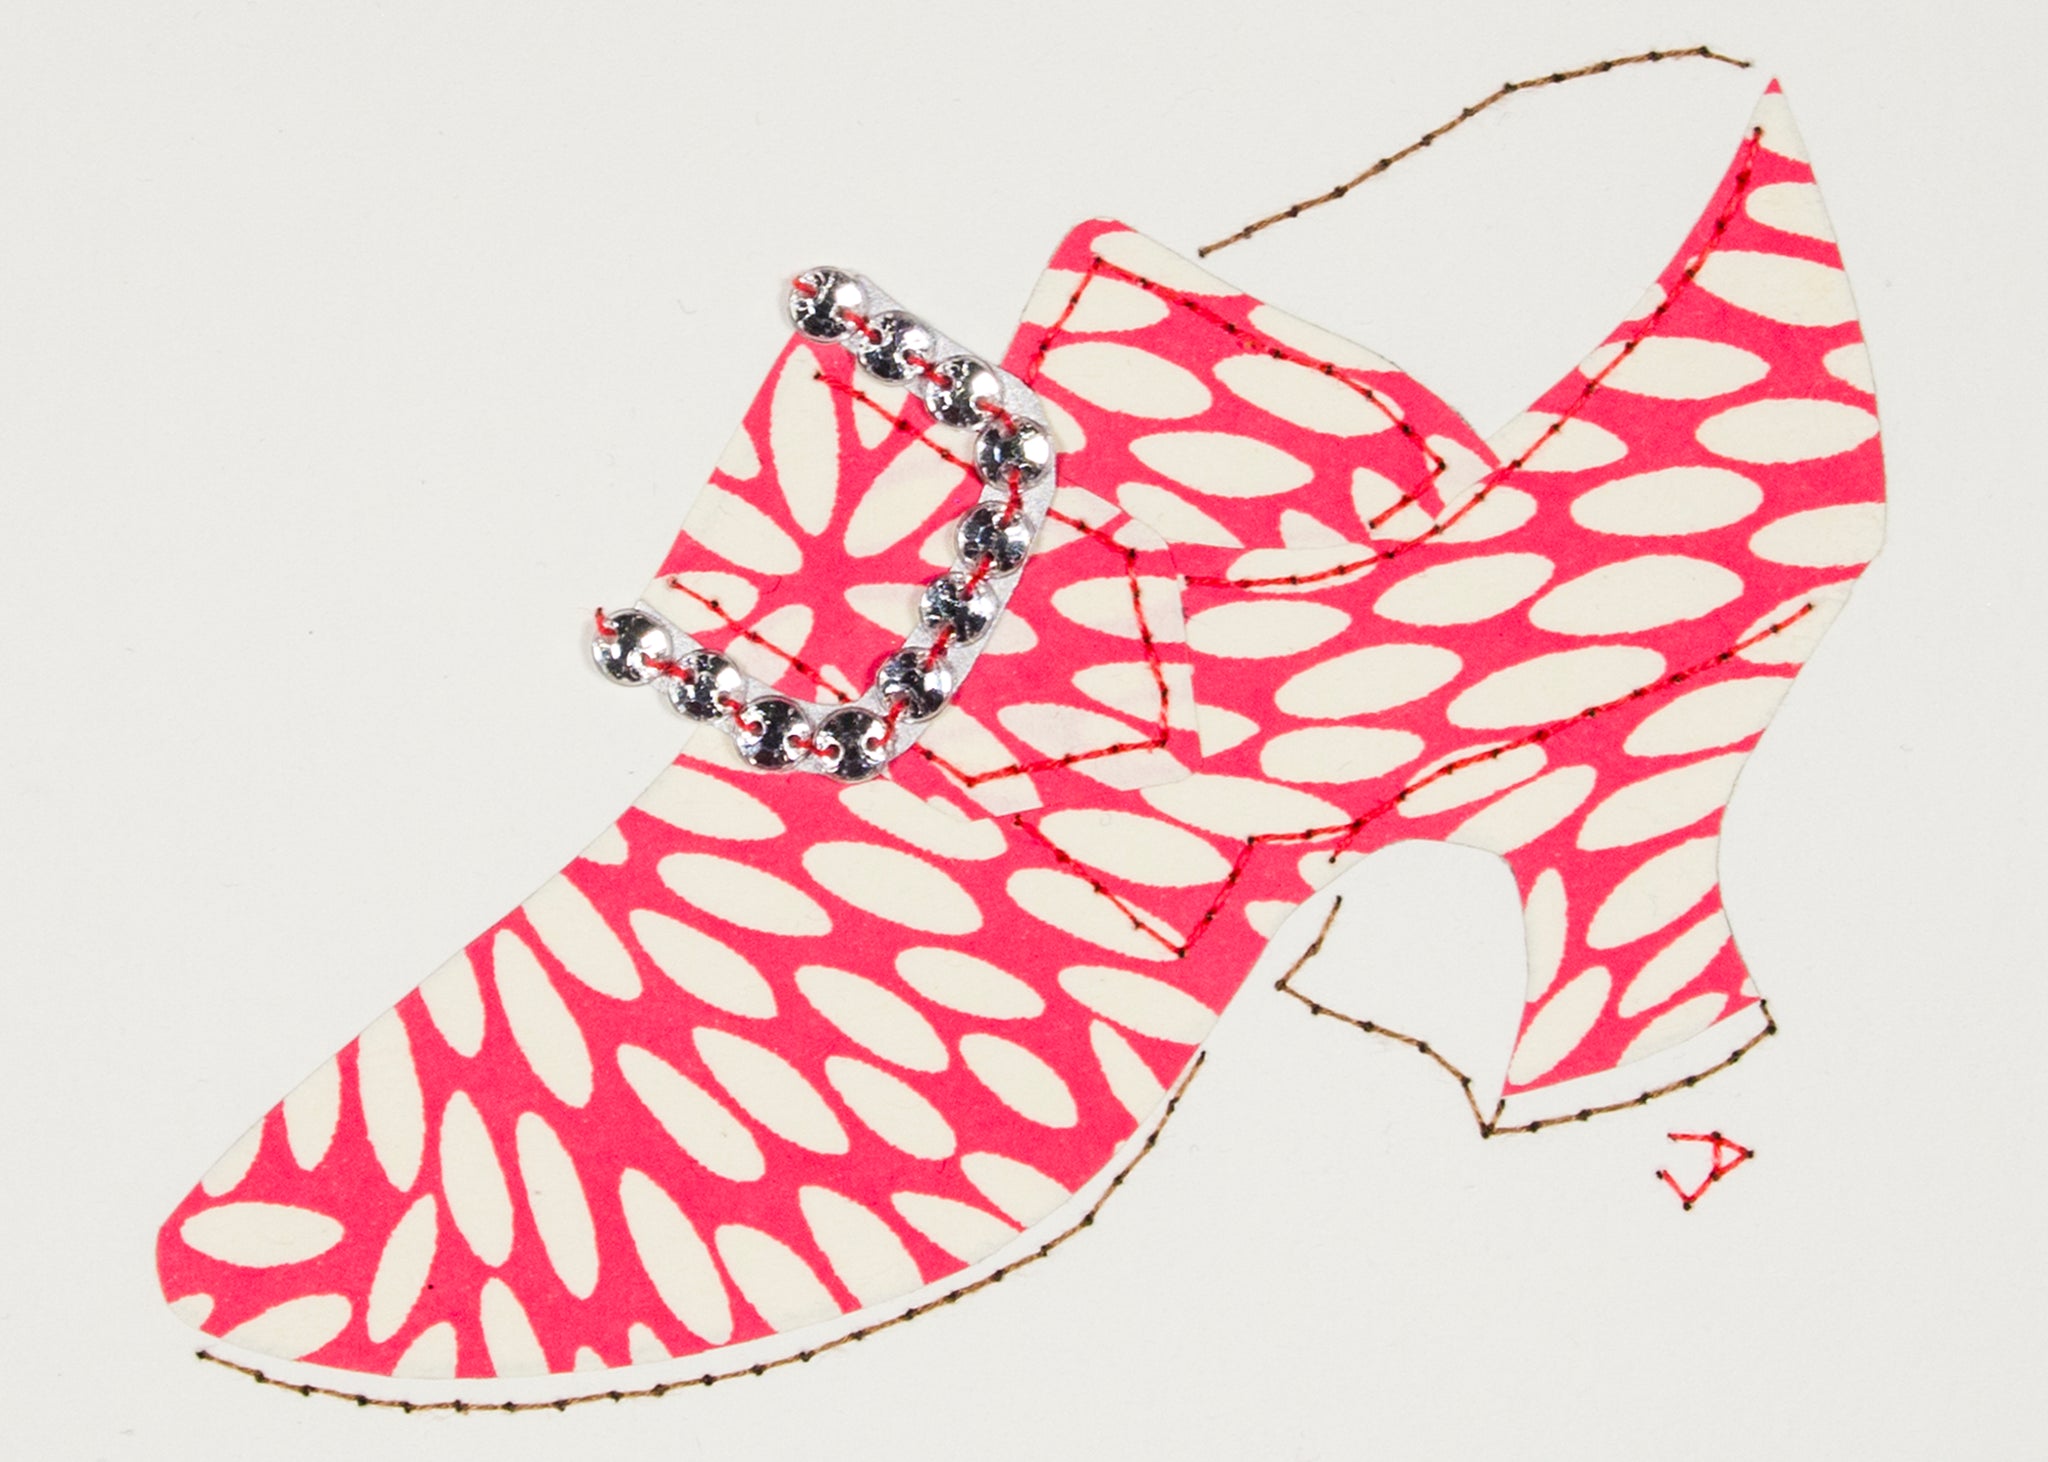 Hand-stitched 1760s shoe patterned in pink and white paper and accented with a rhinestone buckle